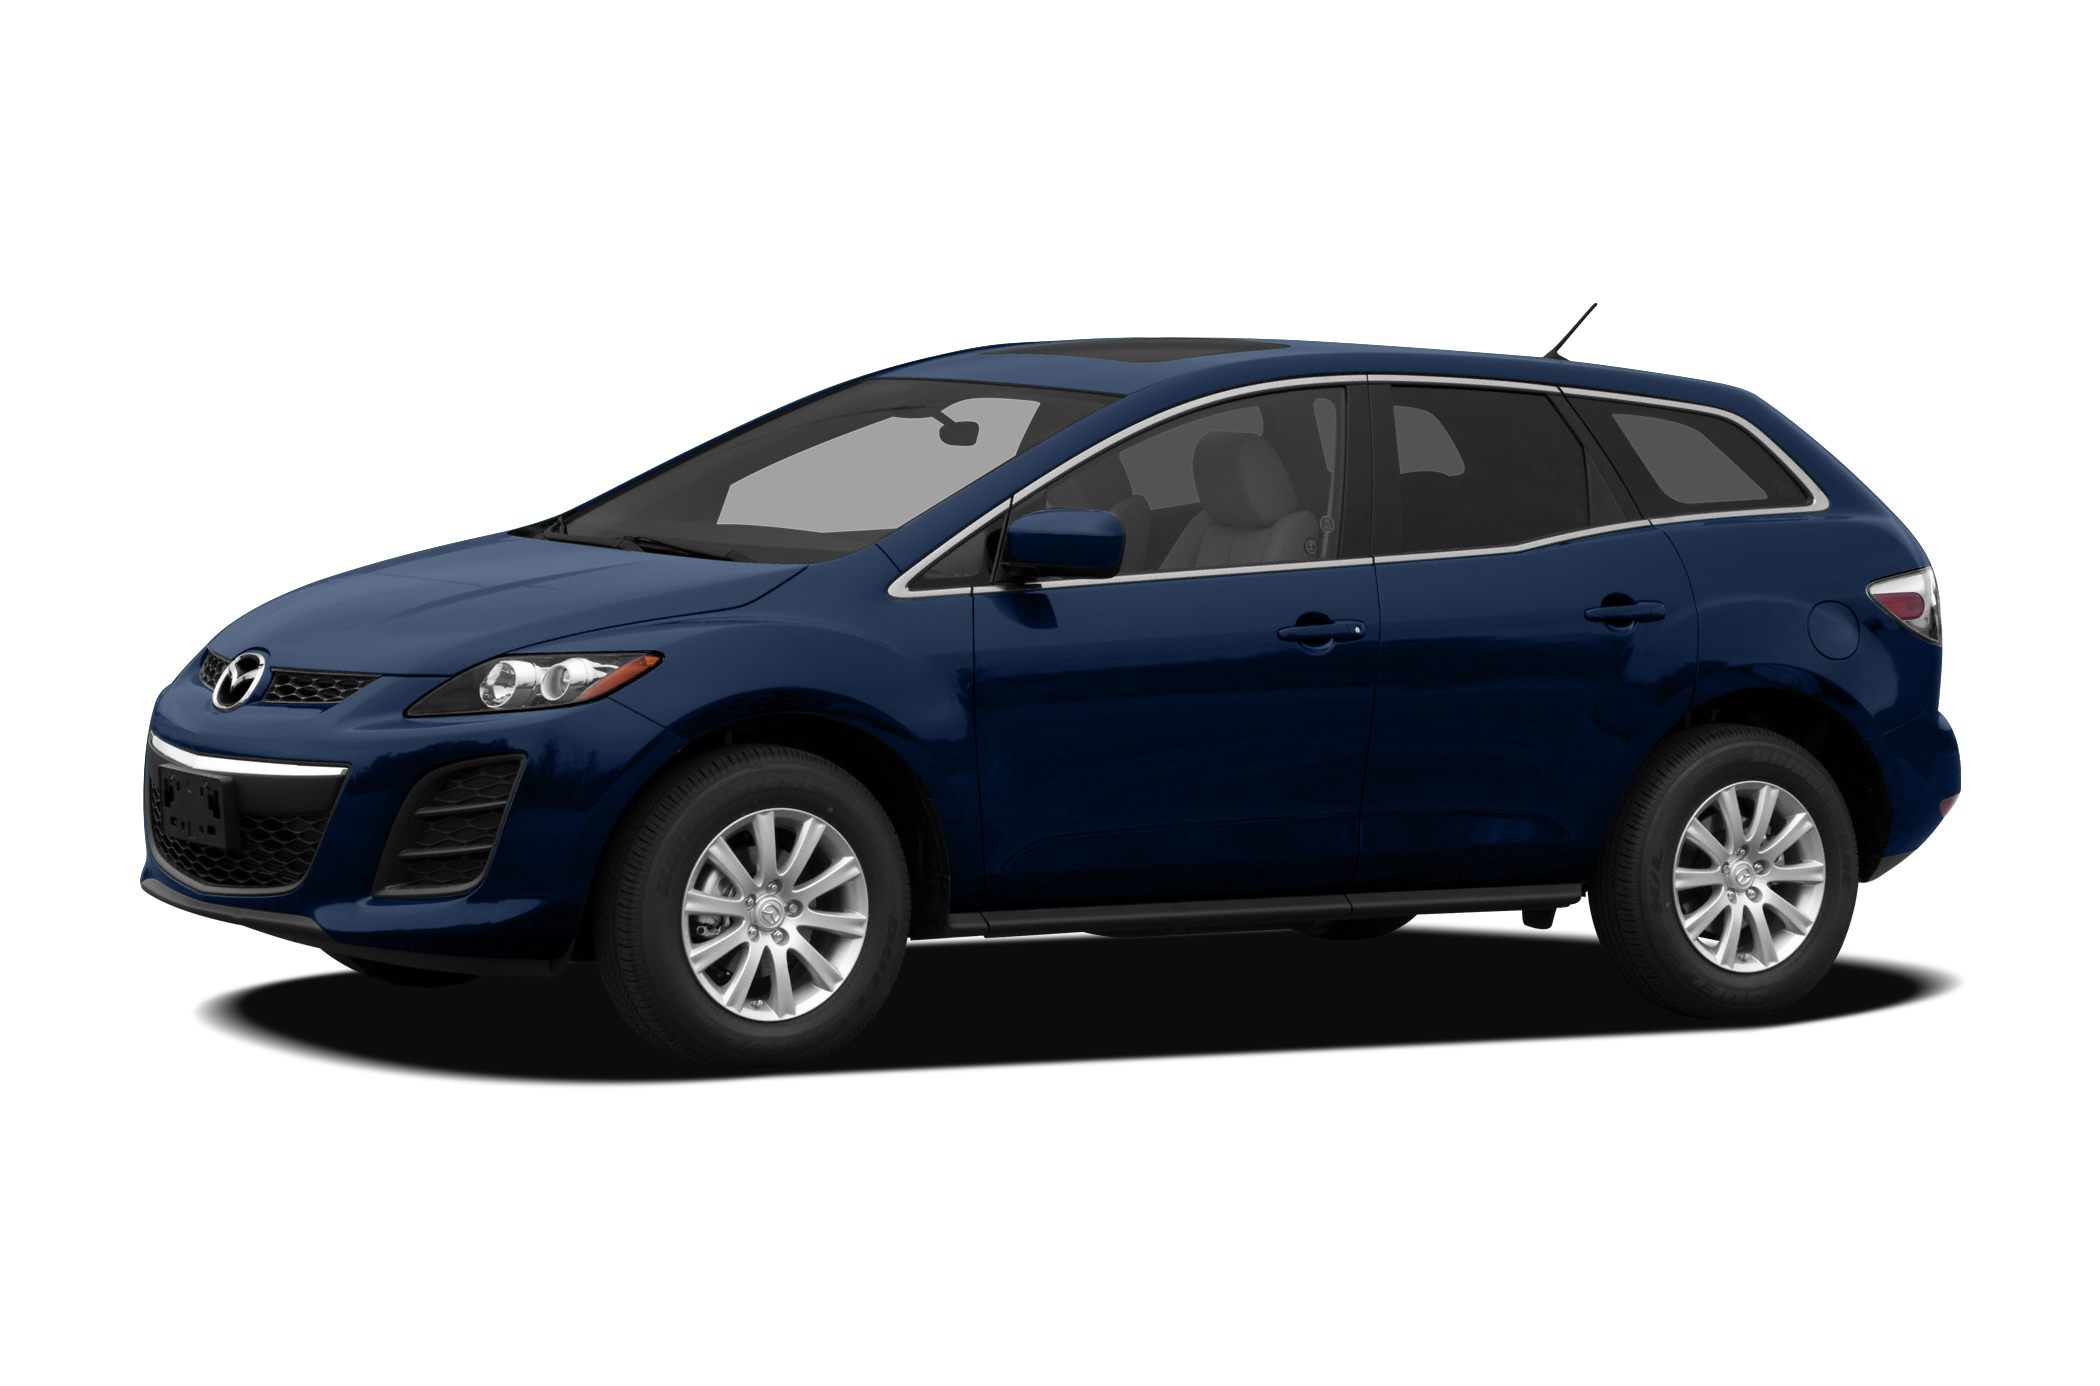 2012 Mazda Cx 7 S Grand Touring 4dr All Wheel Drive Pictures